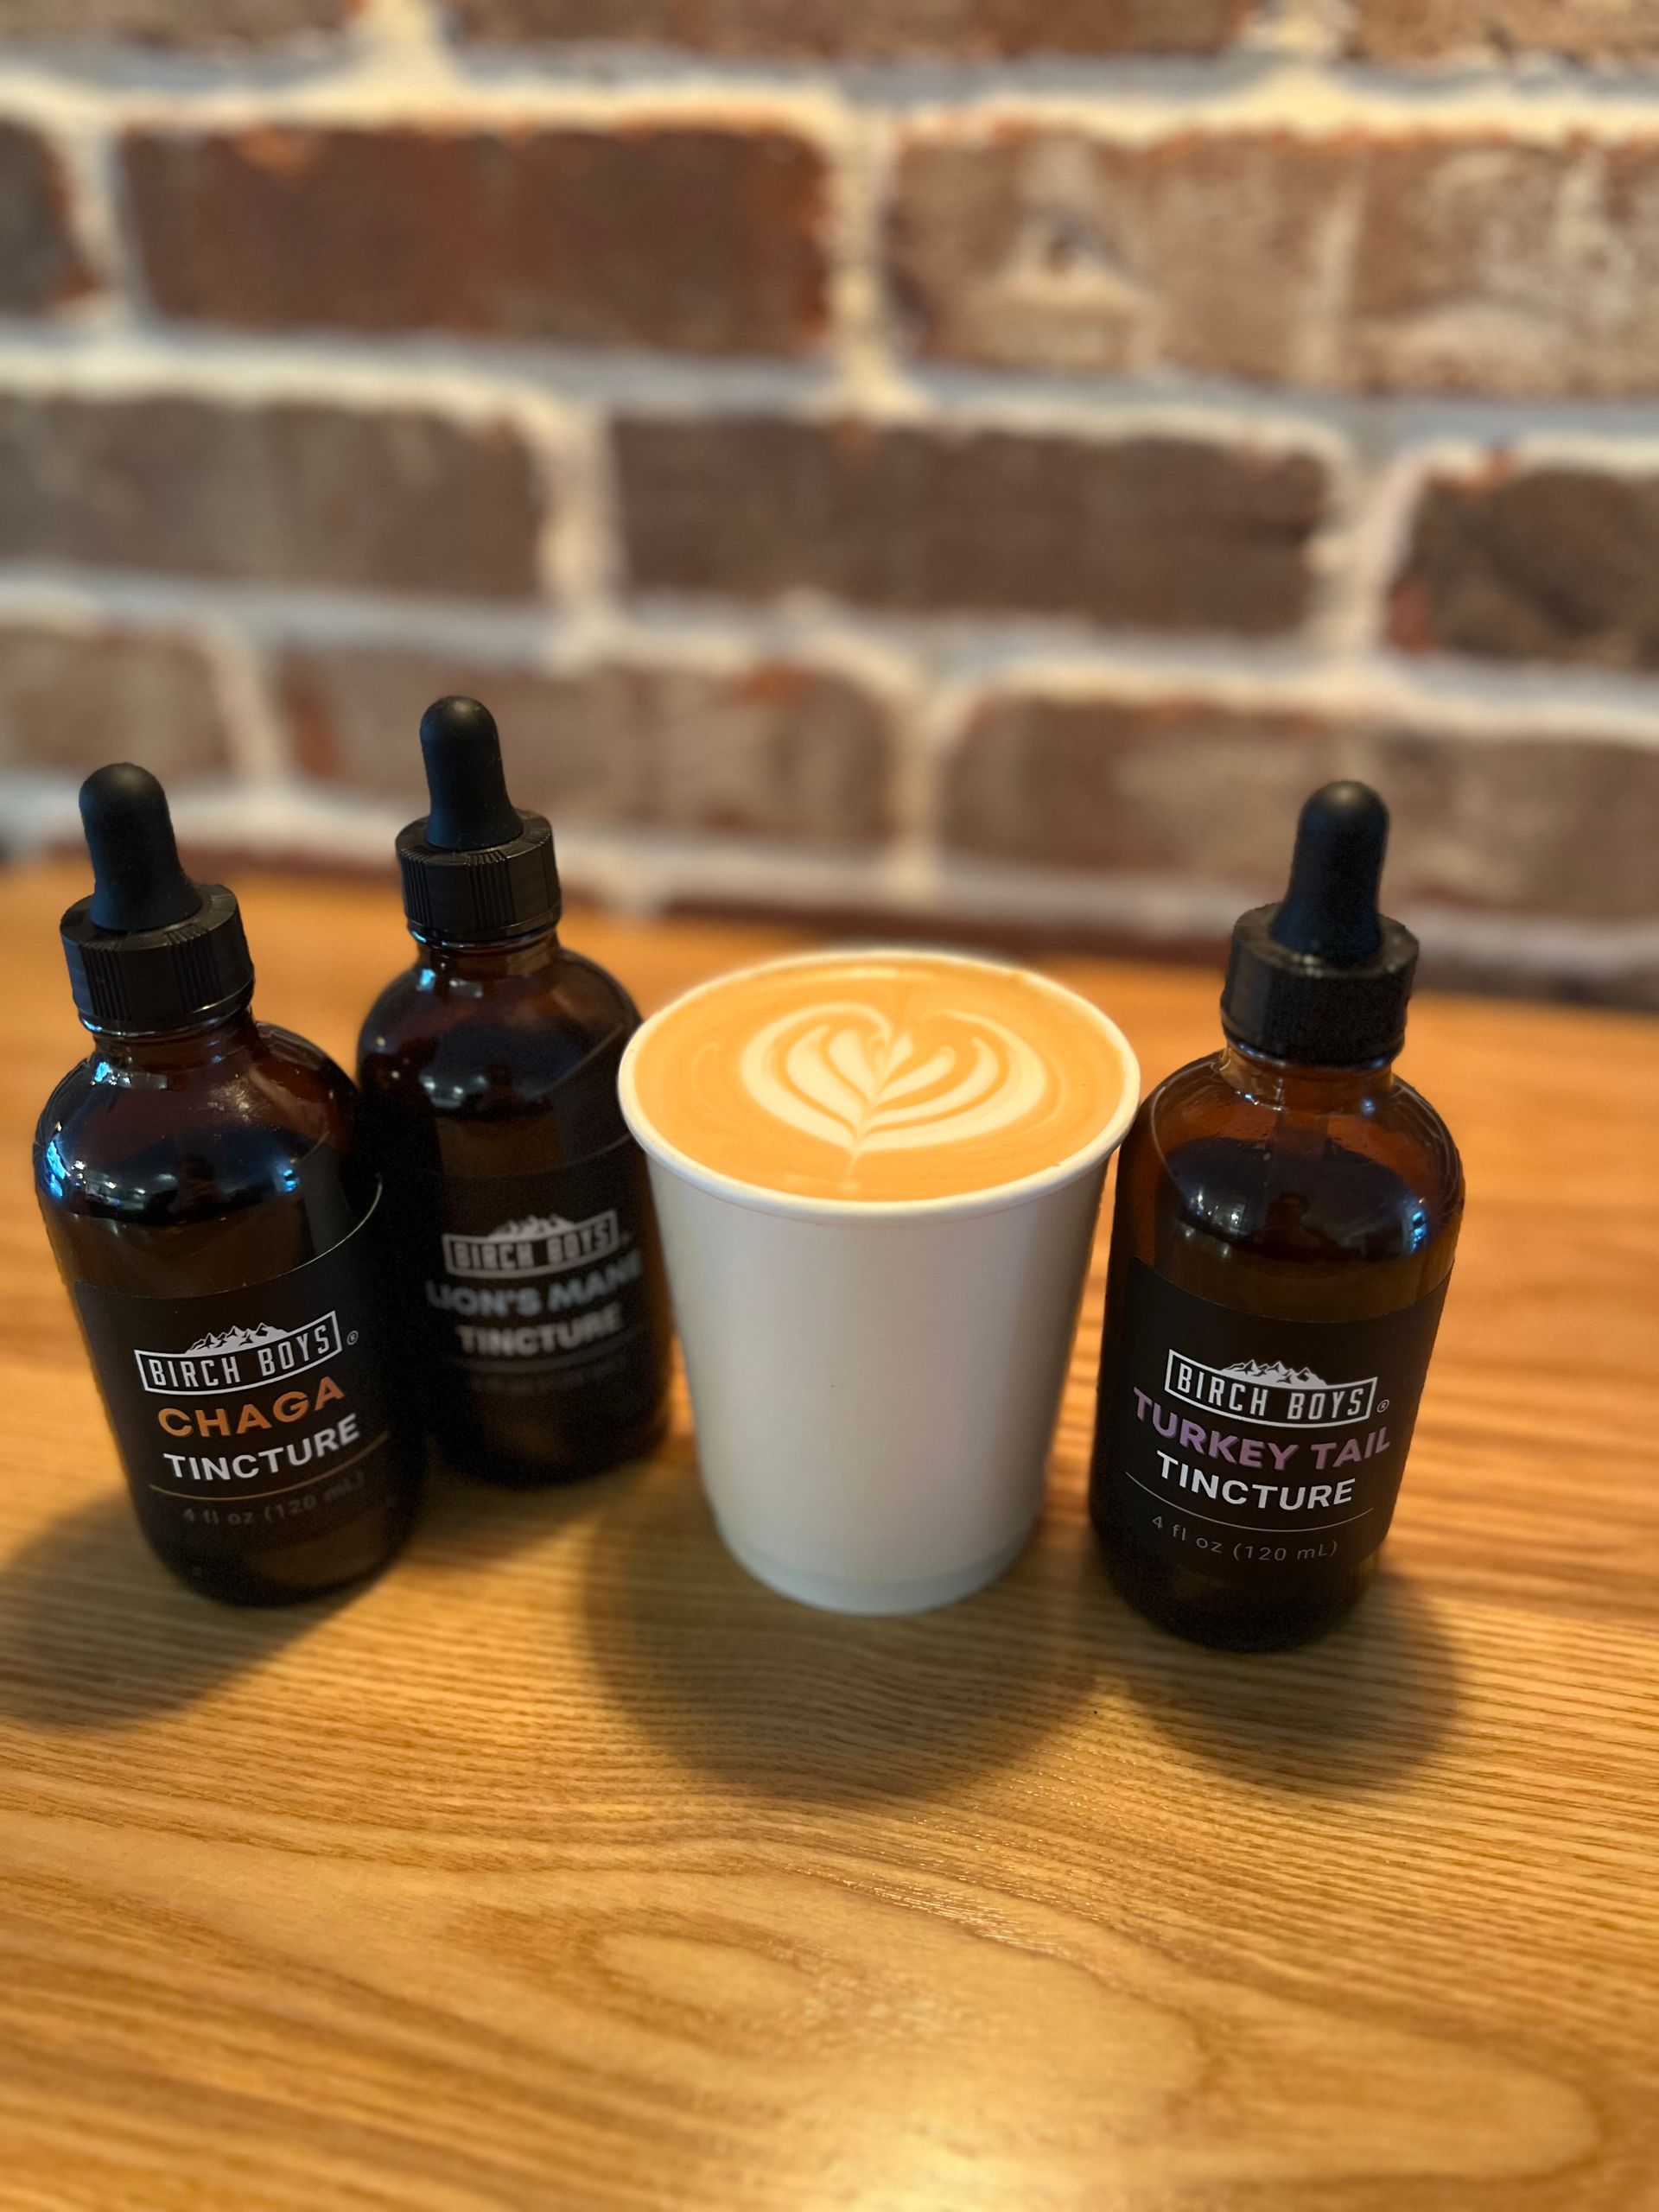 This image is a picture of a cappuccino with latte art next to 3 bottles of mushroom adaptogens. 